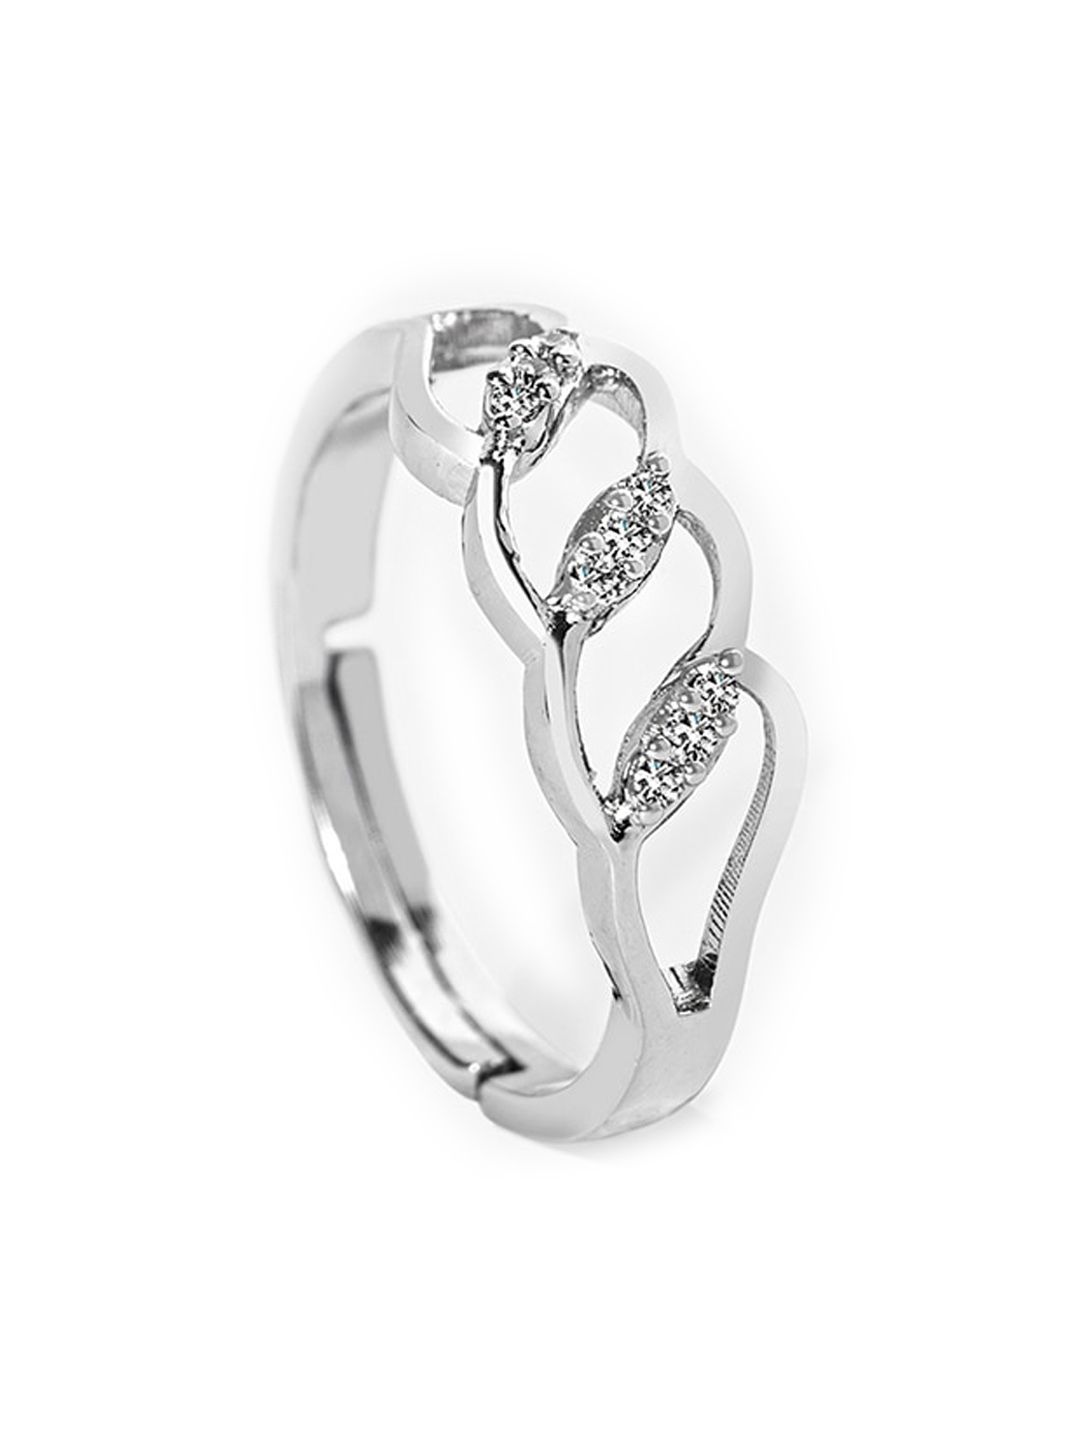 Mikoto by FableStreet Rhodium-Plated Silver-Toned & White CZ-Studded Finger Ring Price in India